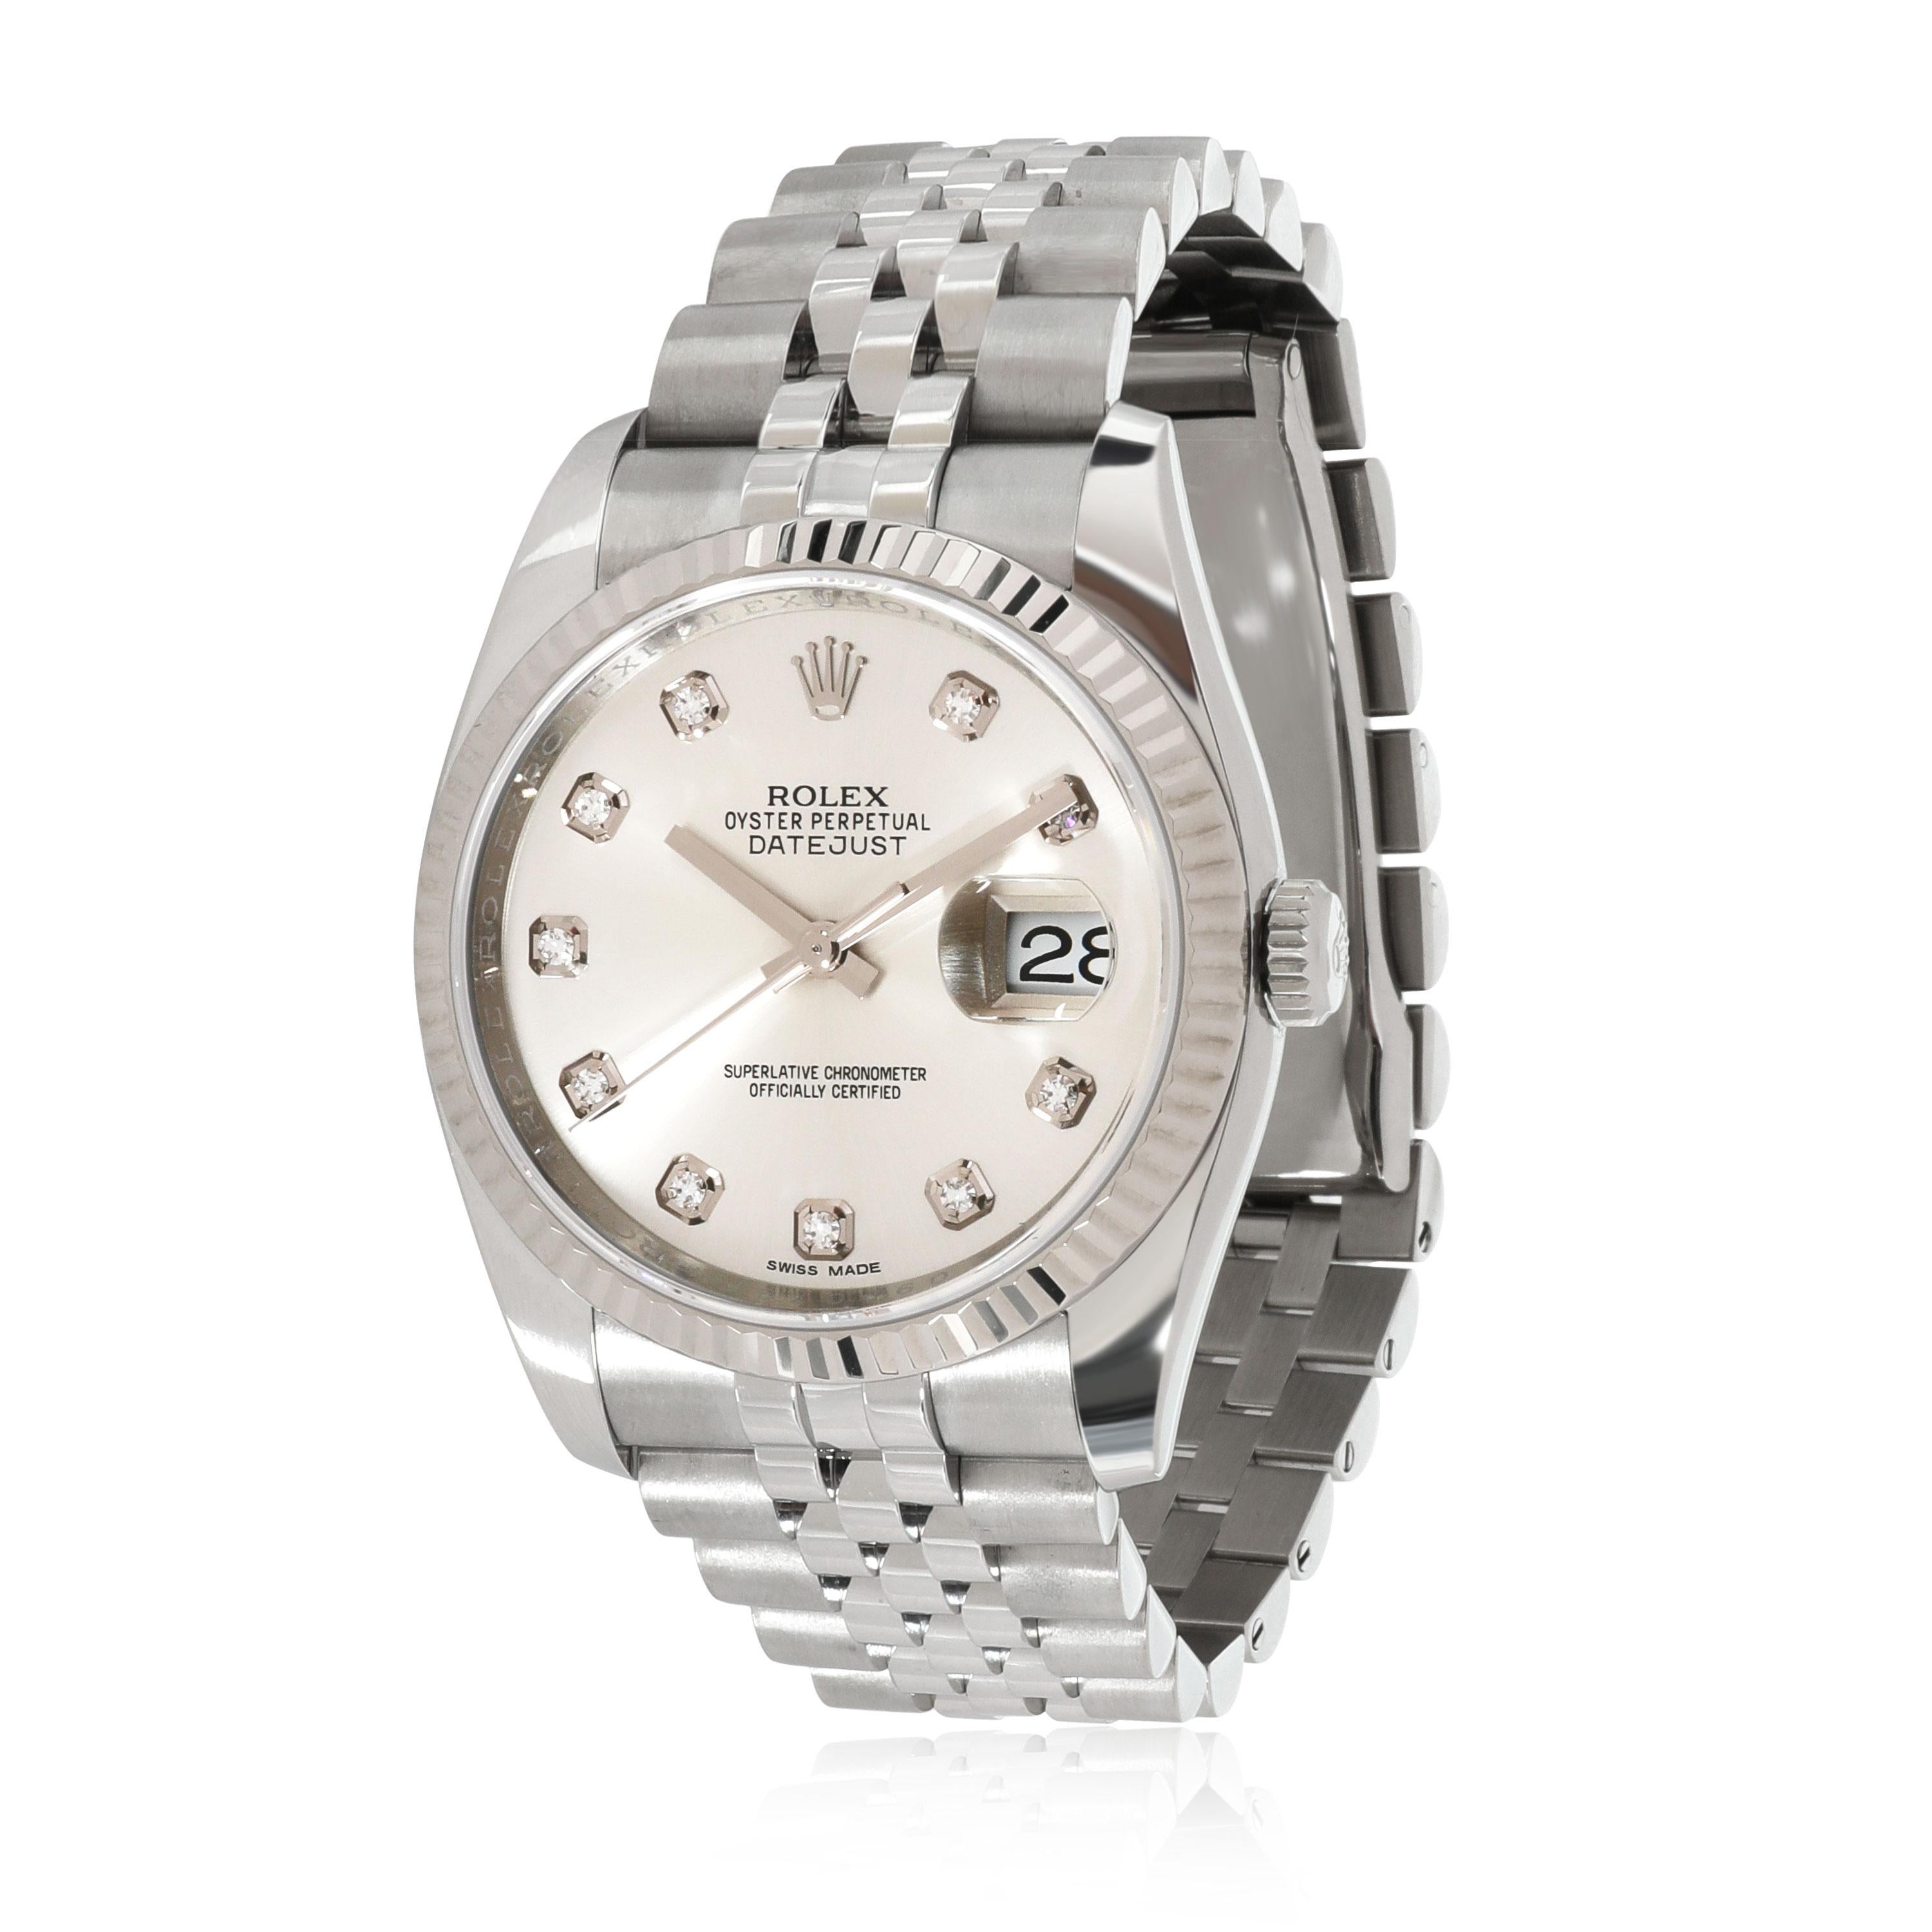 Rolex Datejust 116234 Men's Watch in 18kt Stainless Steel/White Gold

SKU: 112692

PRIMARY DETAILS
Brand:  Rolex
Model: Datejust
Country of Origin: Switzerland
Movement Type: Mechanical: Automatic/Kinetic
Year Manufactured: 2018
Year of Manufacture: